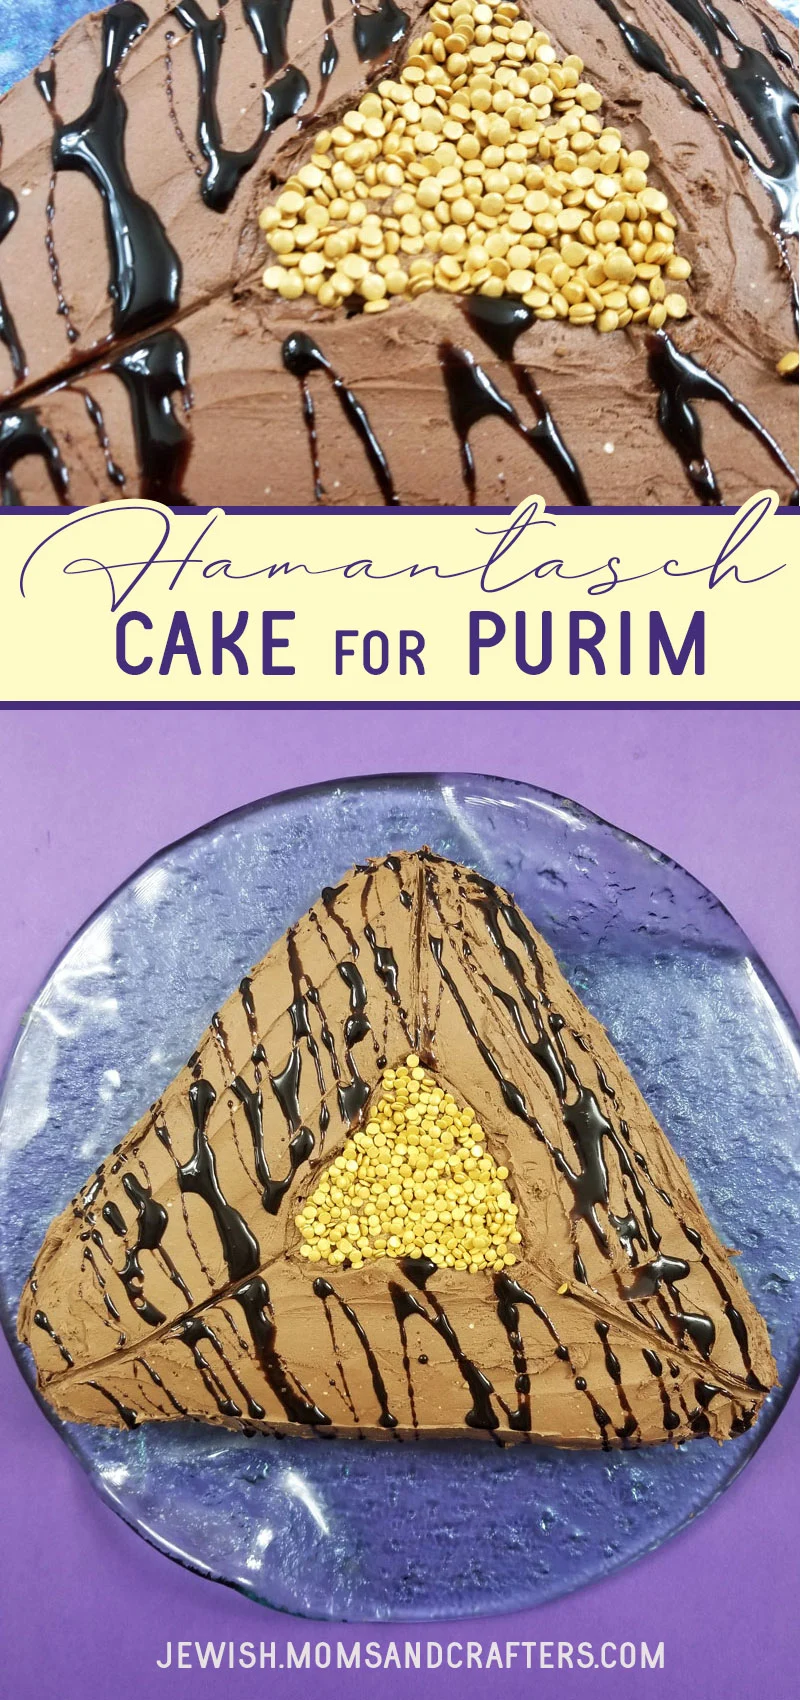 Click to make this adorable and insanely easy purim cake -one of my favorite Purim ideas that's a fun alternative to hamantaschen (and easier) and that's a great Purim party food!